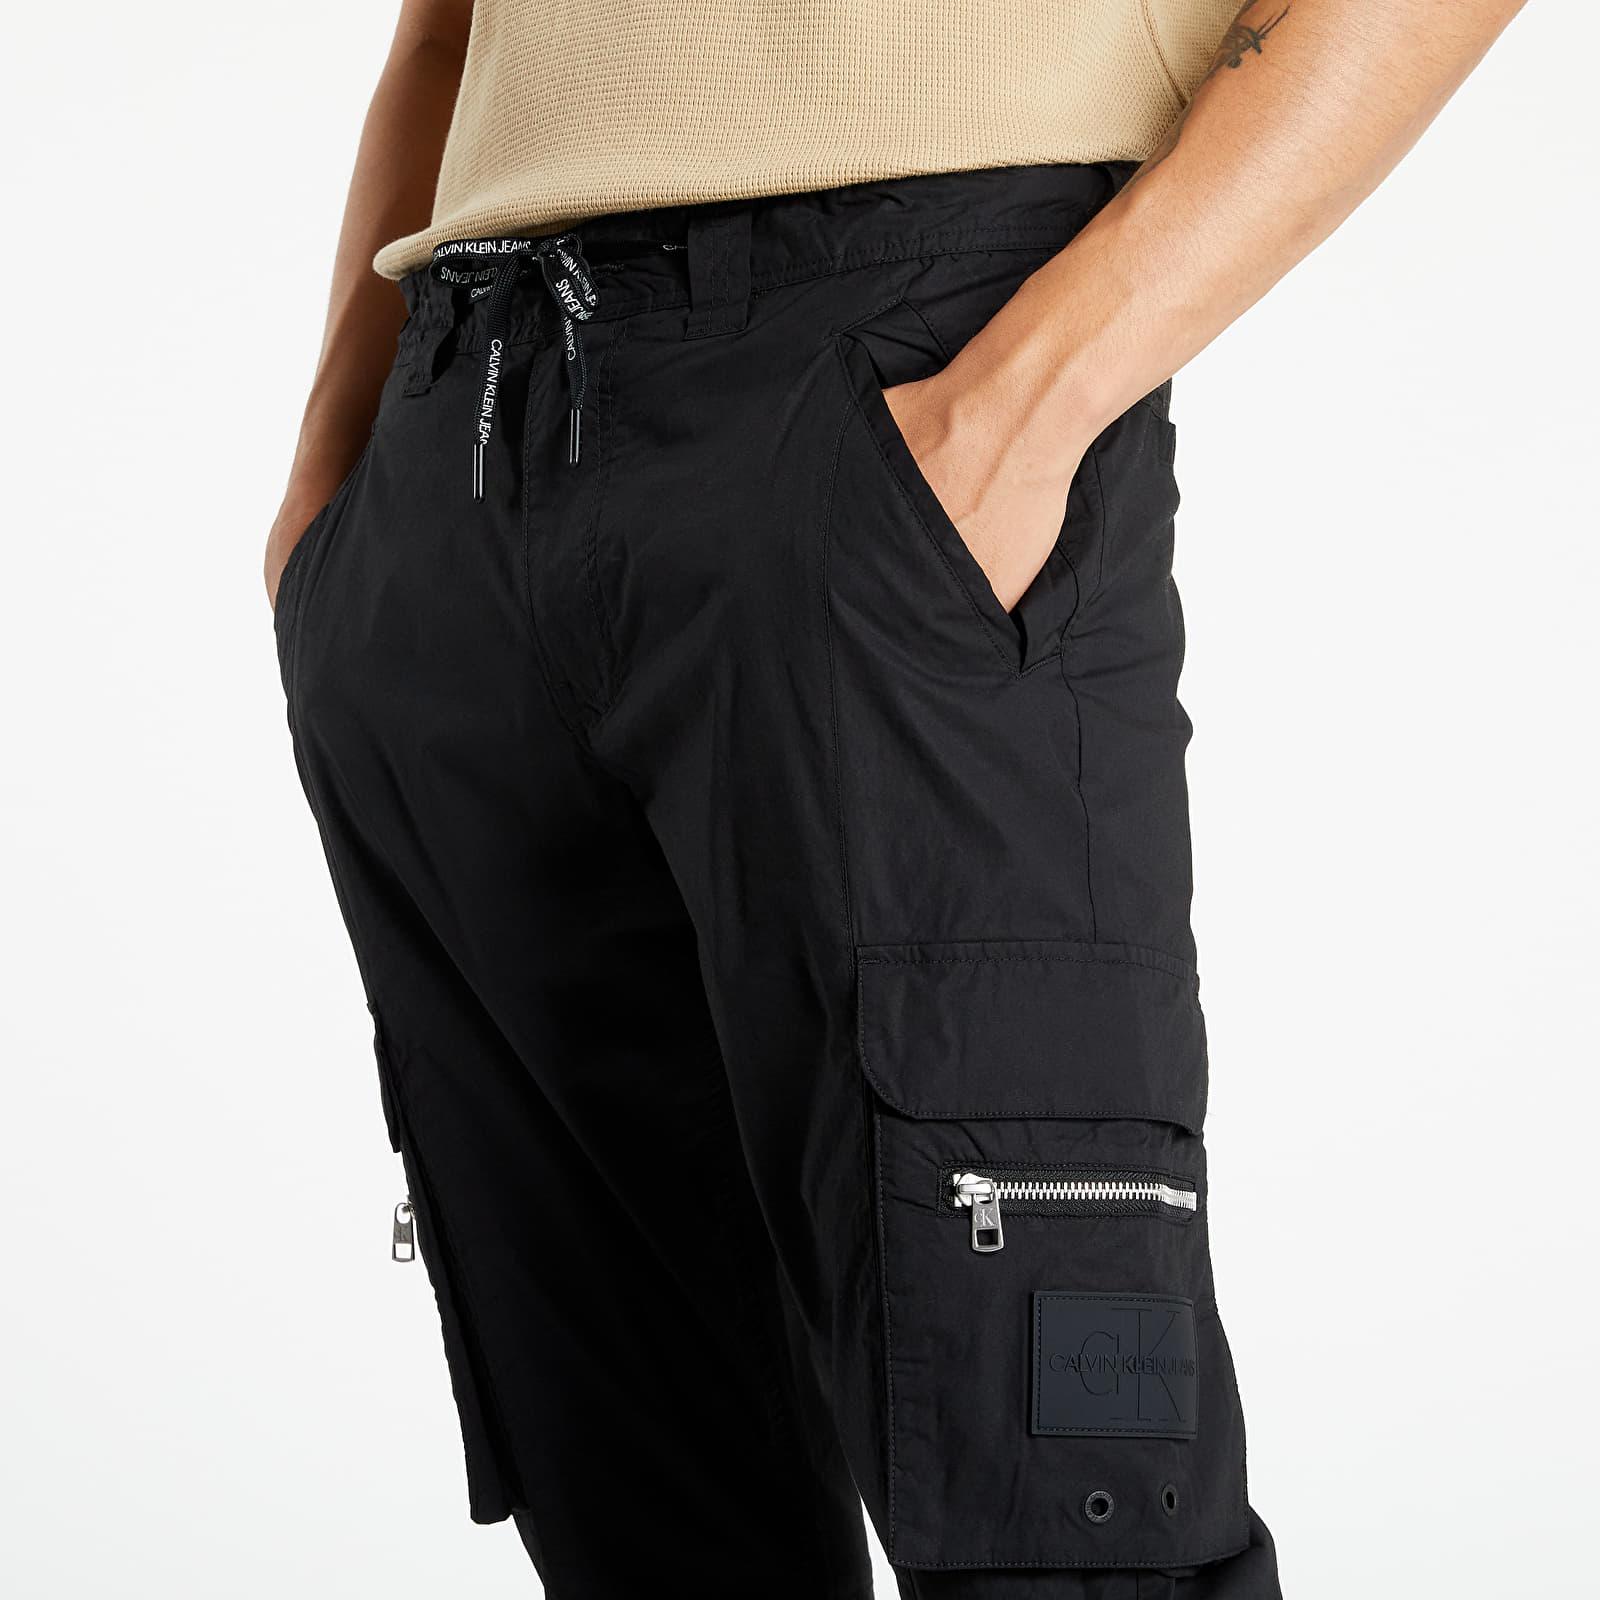 Y2K Calvin Klein Cargo Pants Free Shipping - The Vintage Twin